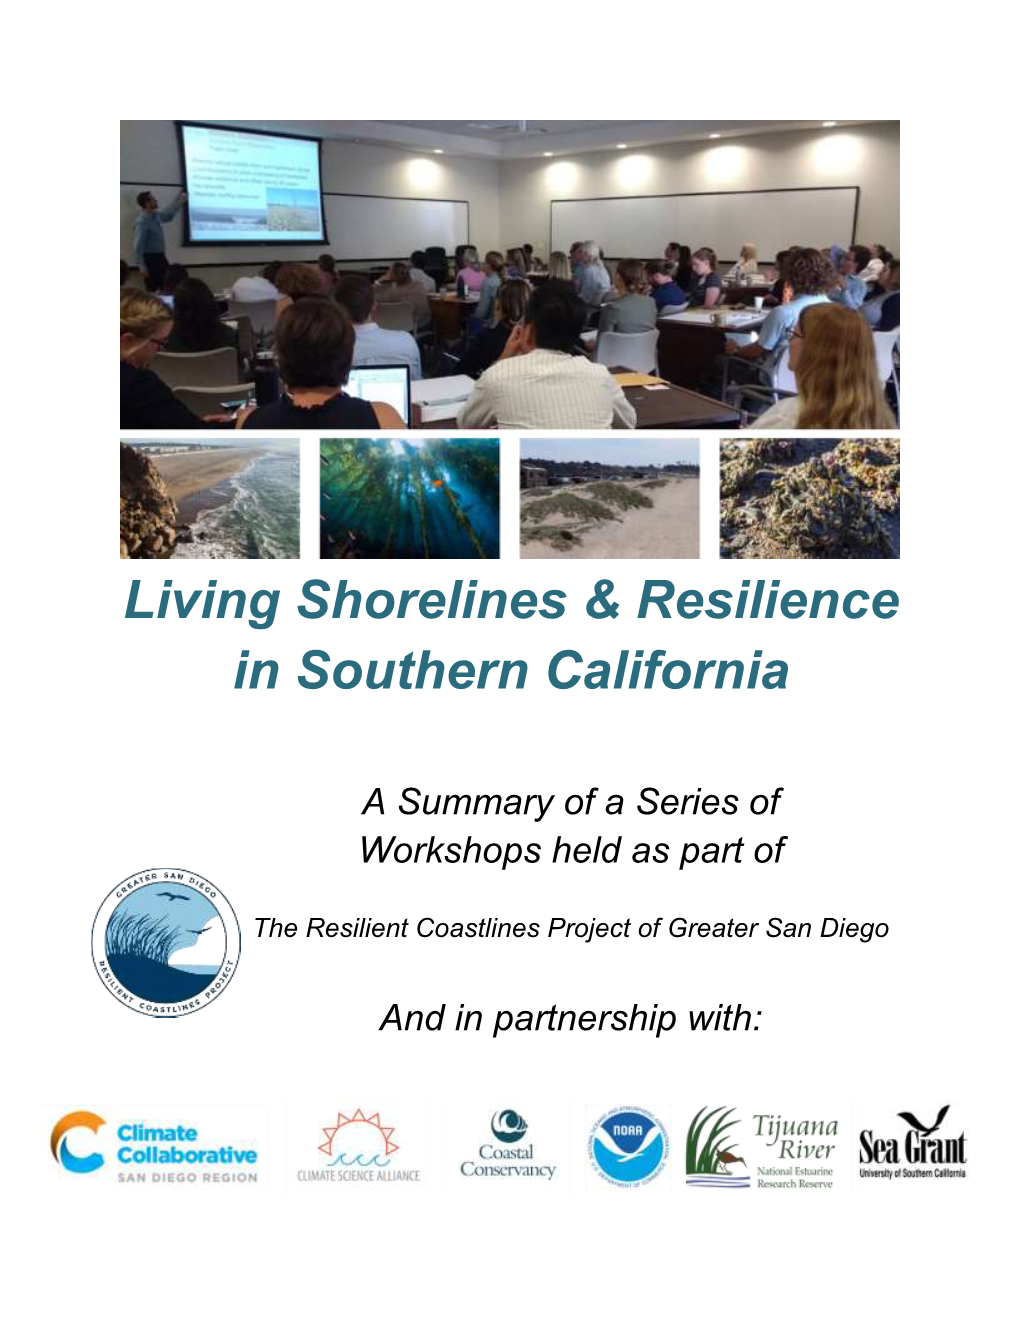 Living Shorelines & Resilience in Southern California